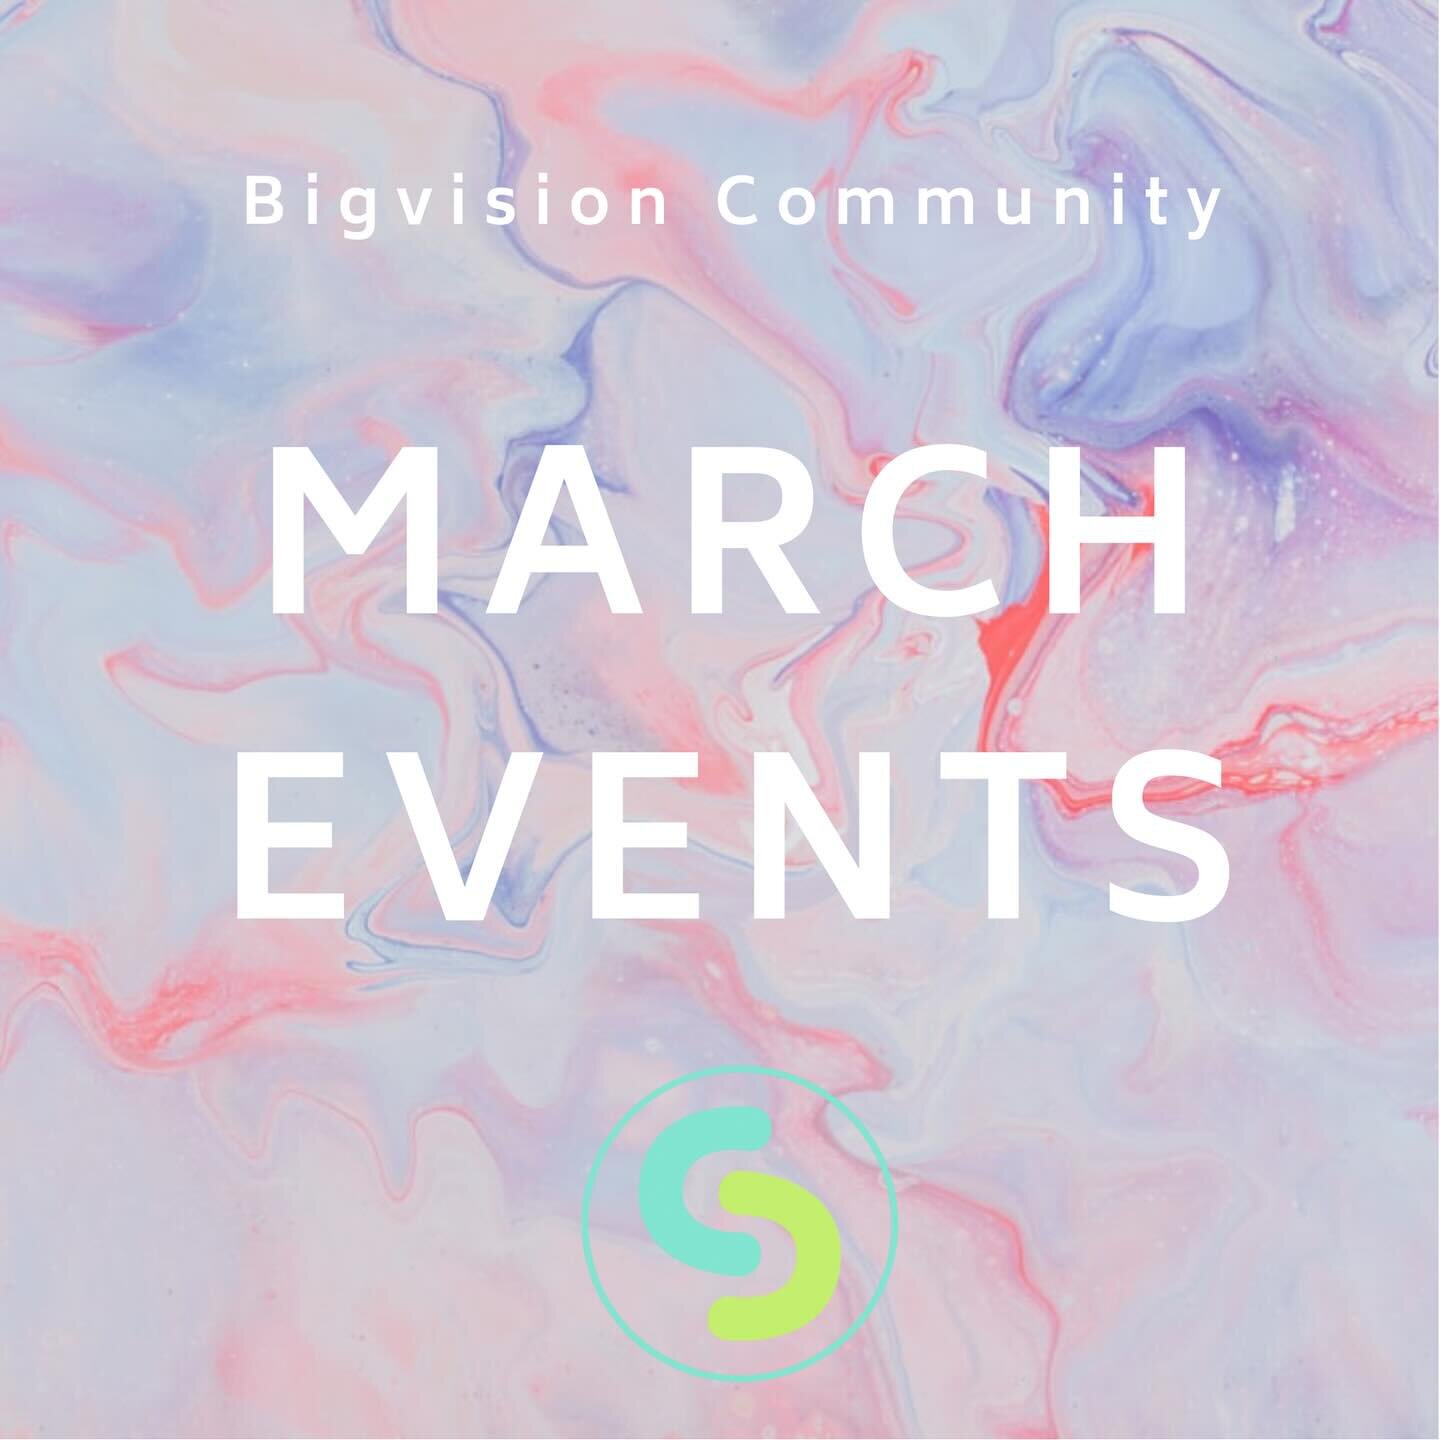 Check your inbox! 📬 We are ready for a new month, new beginnings, welcoming spring 🌷and getting together for some incredible events. 

Head to the events link in bio and sign up now! 
.
.
.
.
#spring #bigvisioncommunity #community #soberevents #sob